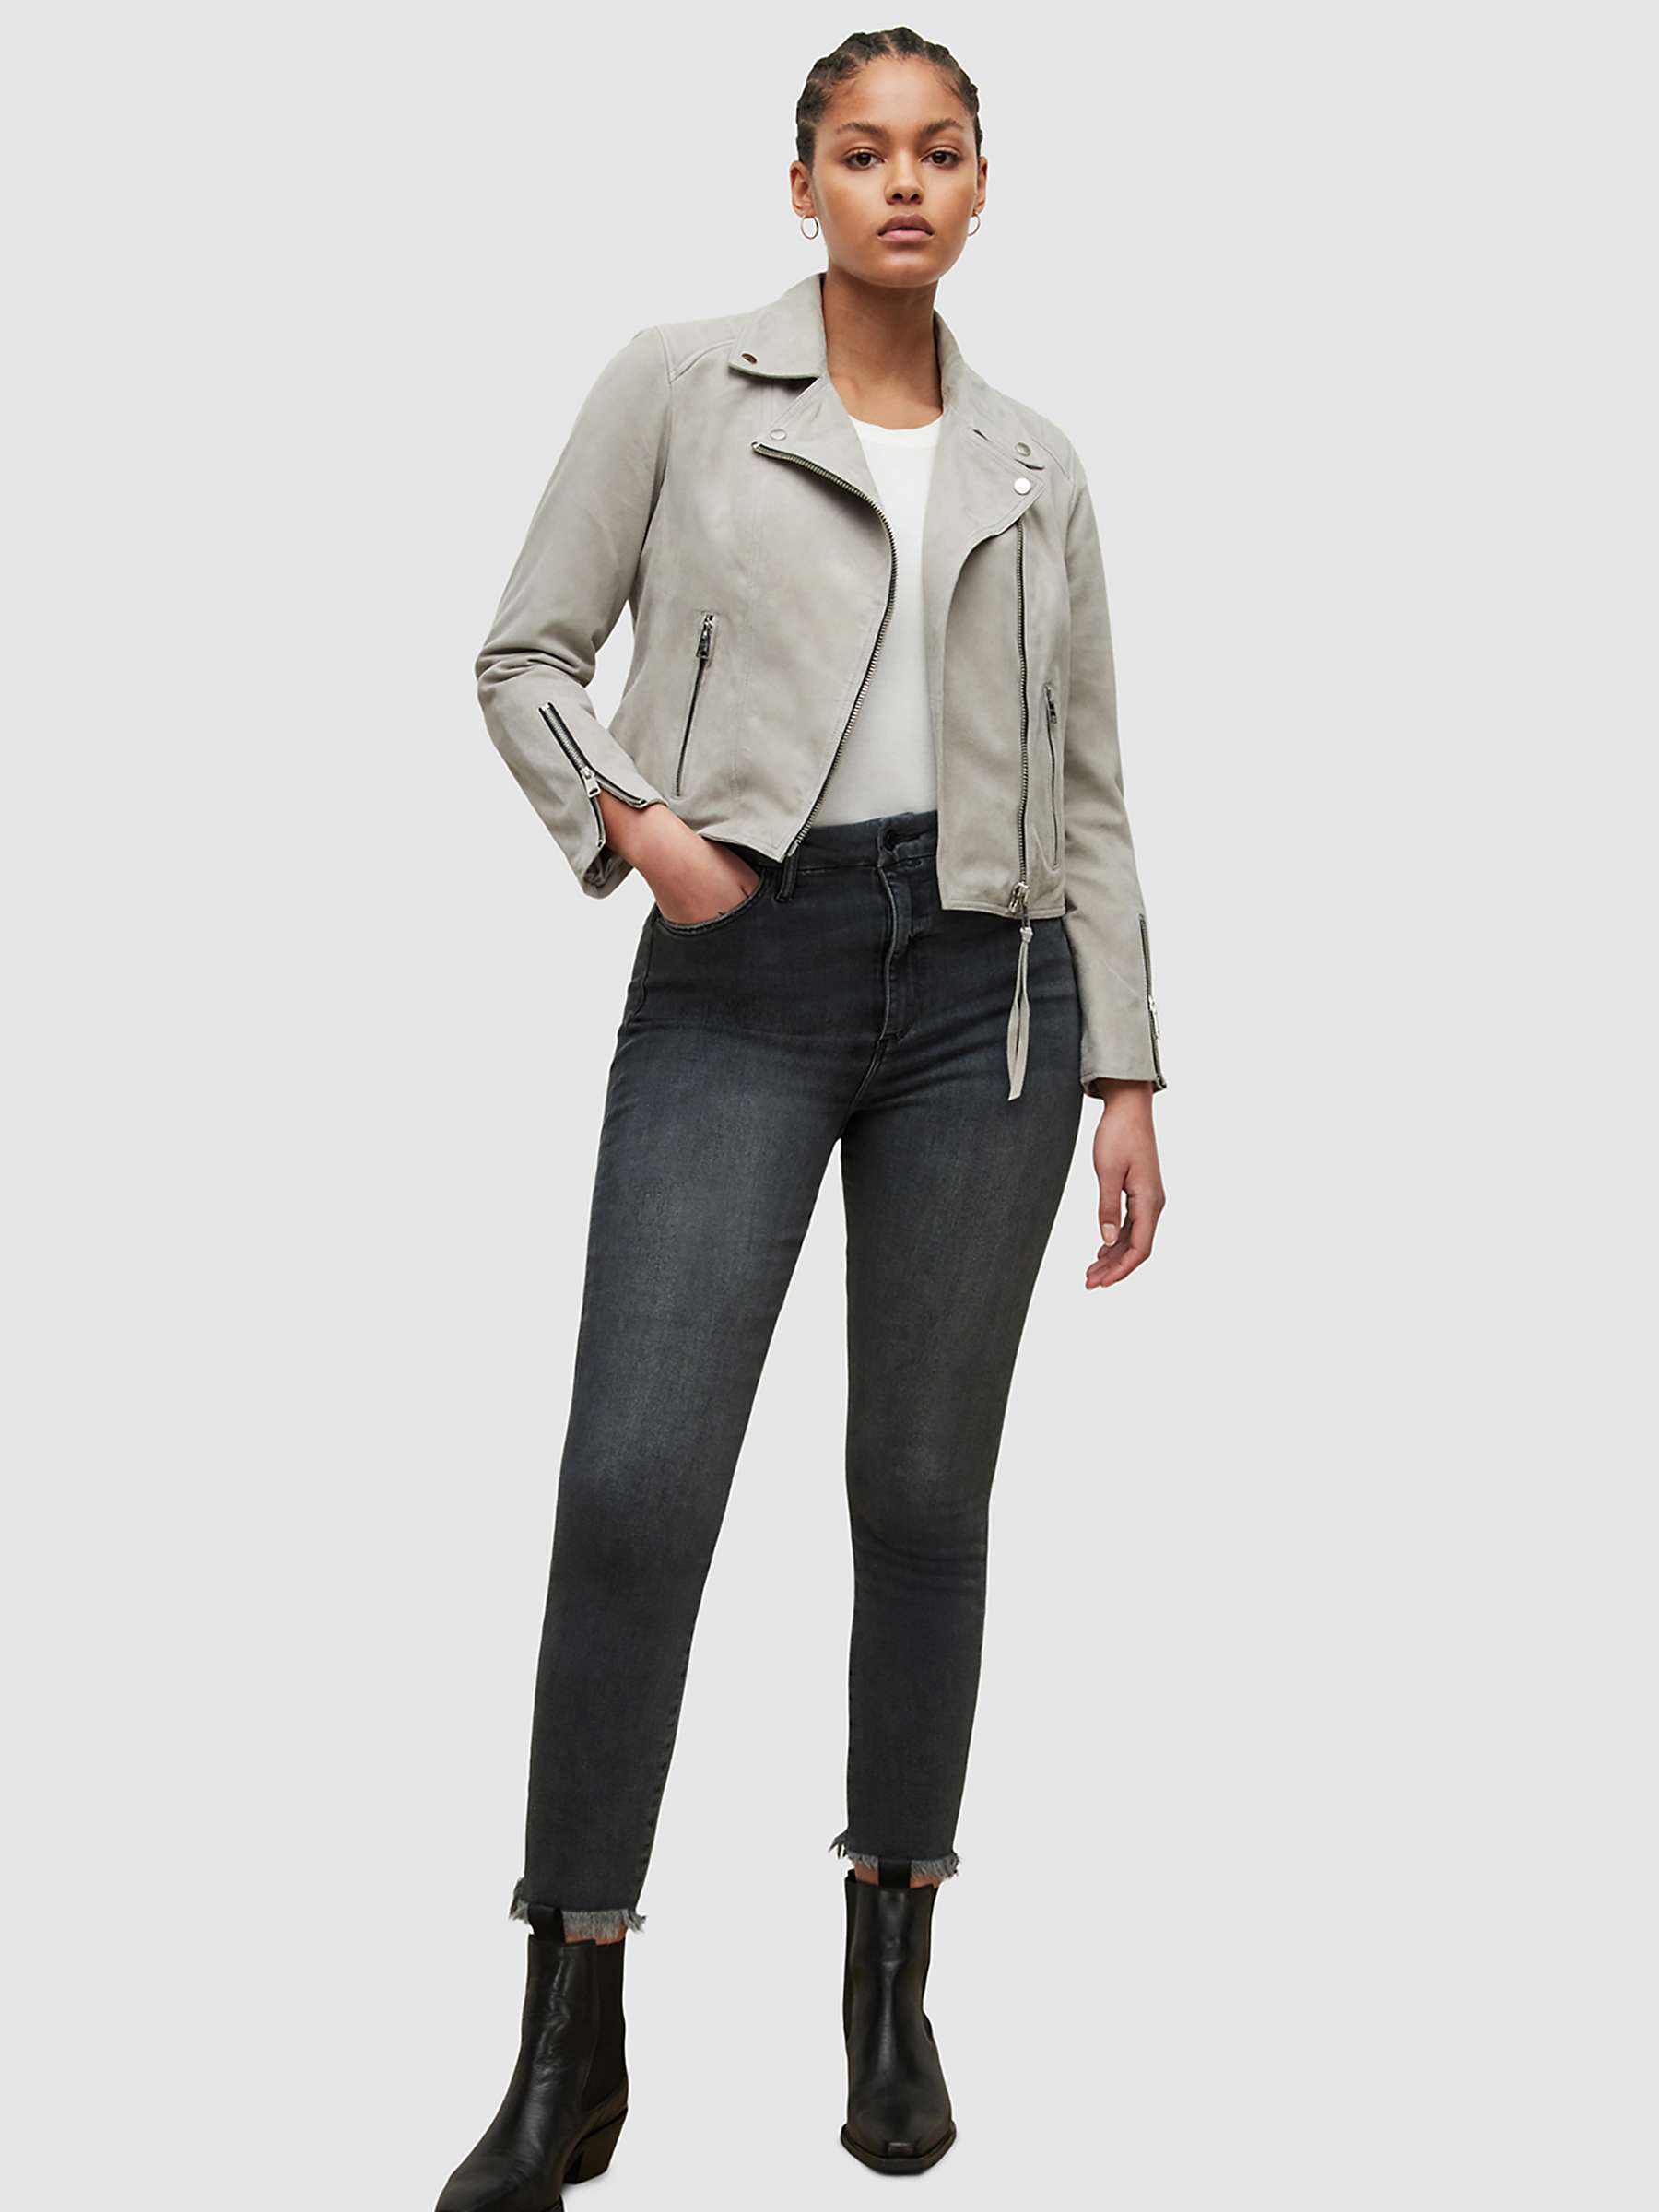 Grey AllSaints Womens Neve Suede Biker Jacket in Pale Grey Womens Clothing Jackets Leather jackets 